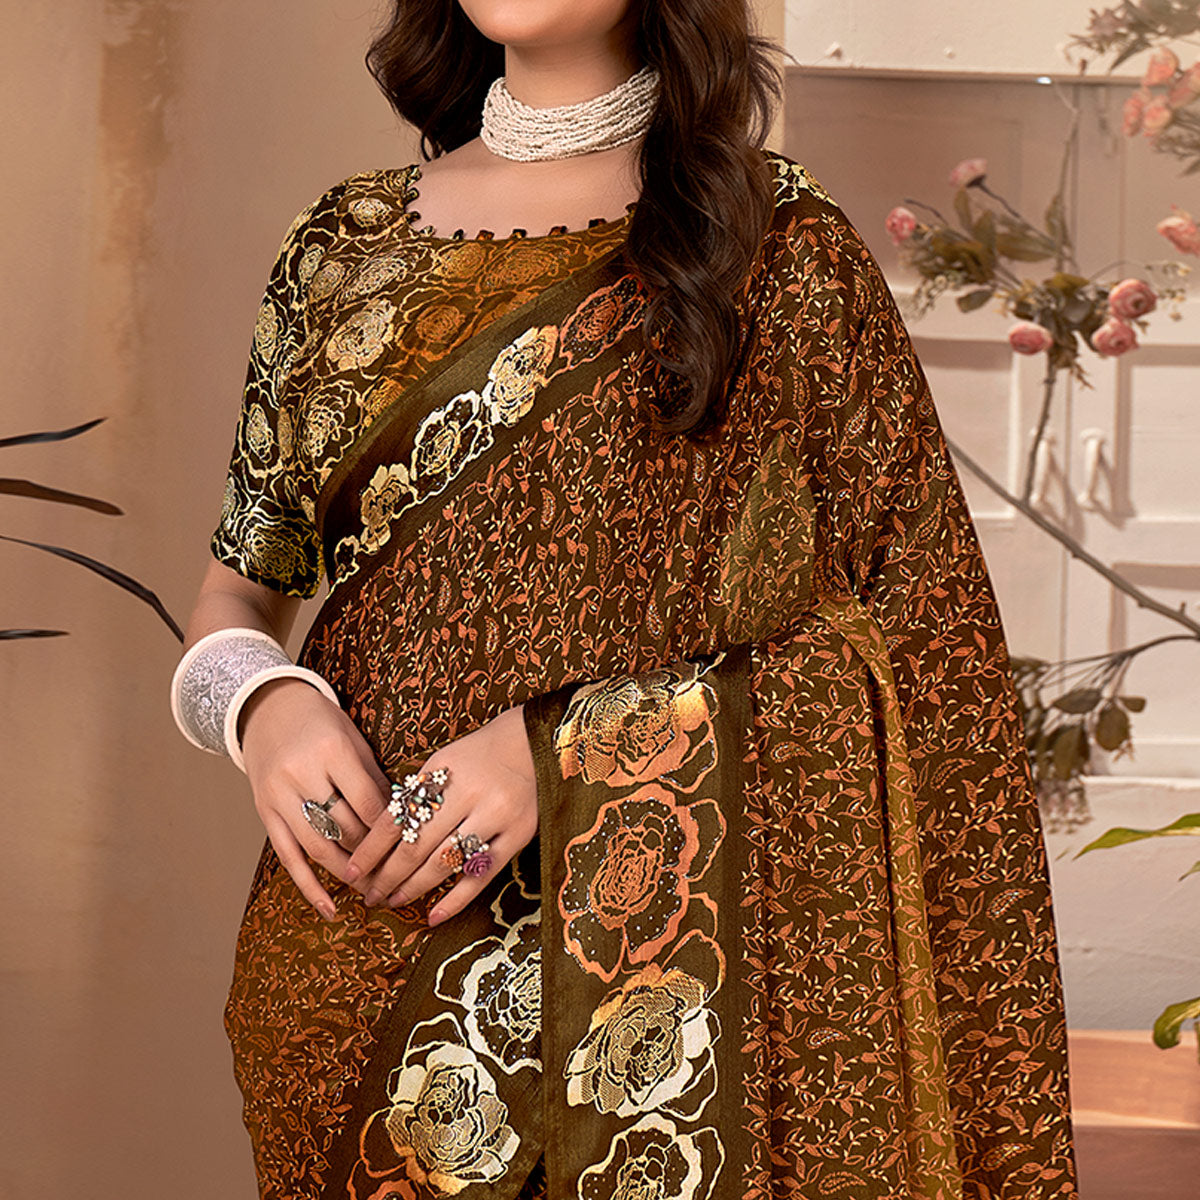 Tan Floral Printed Georgette Saree with Satin Border